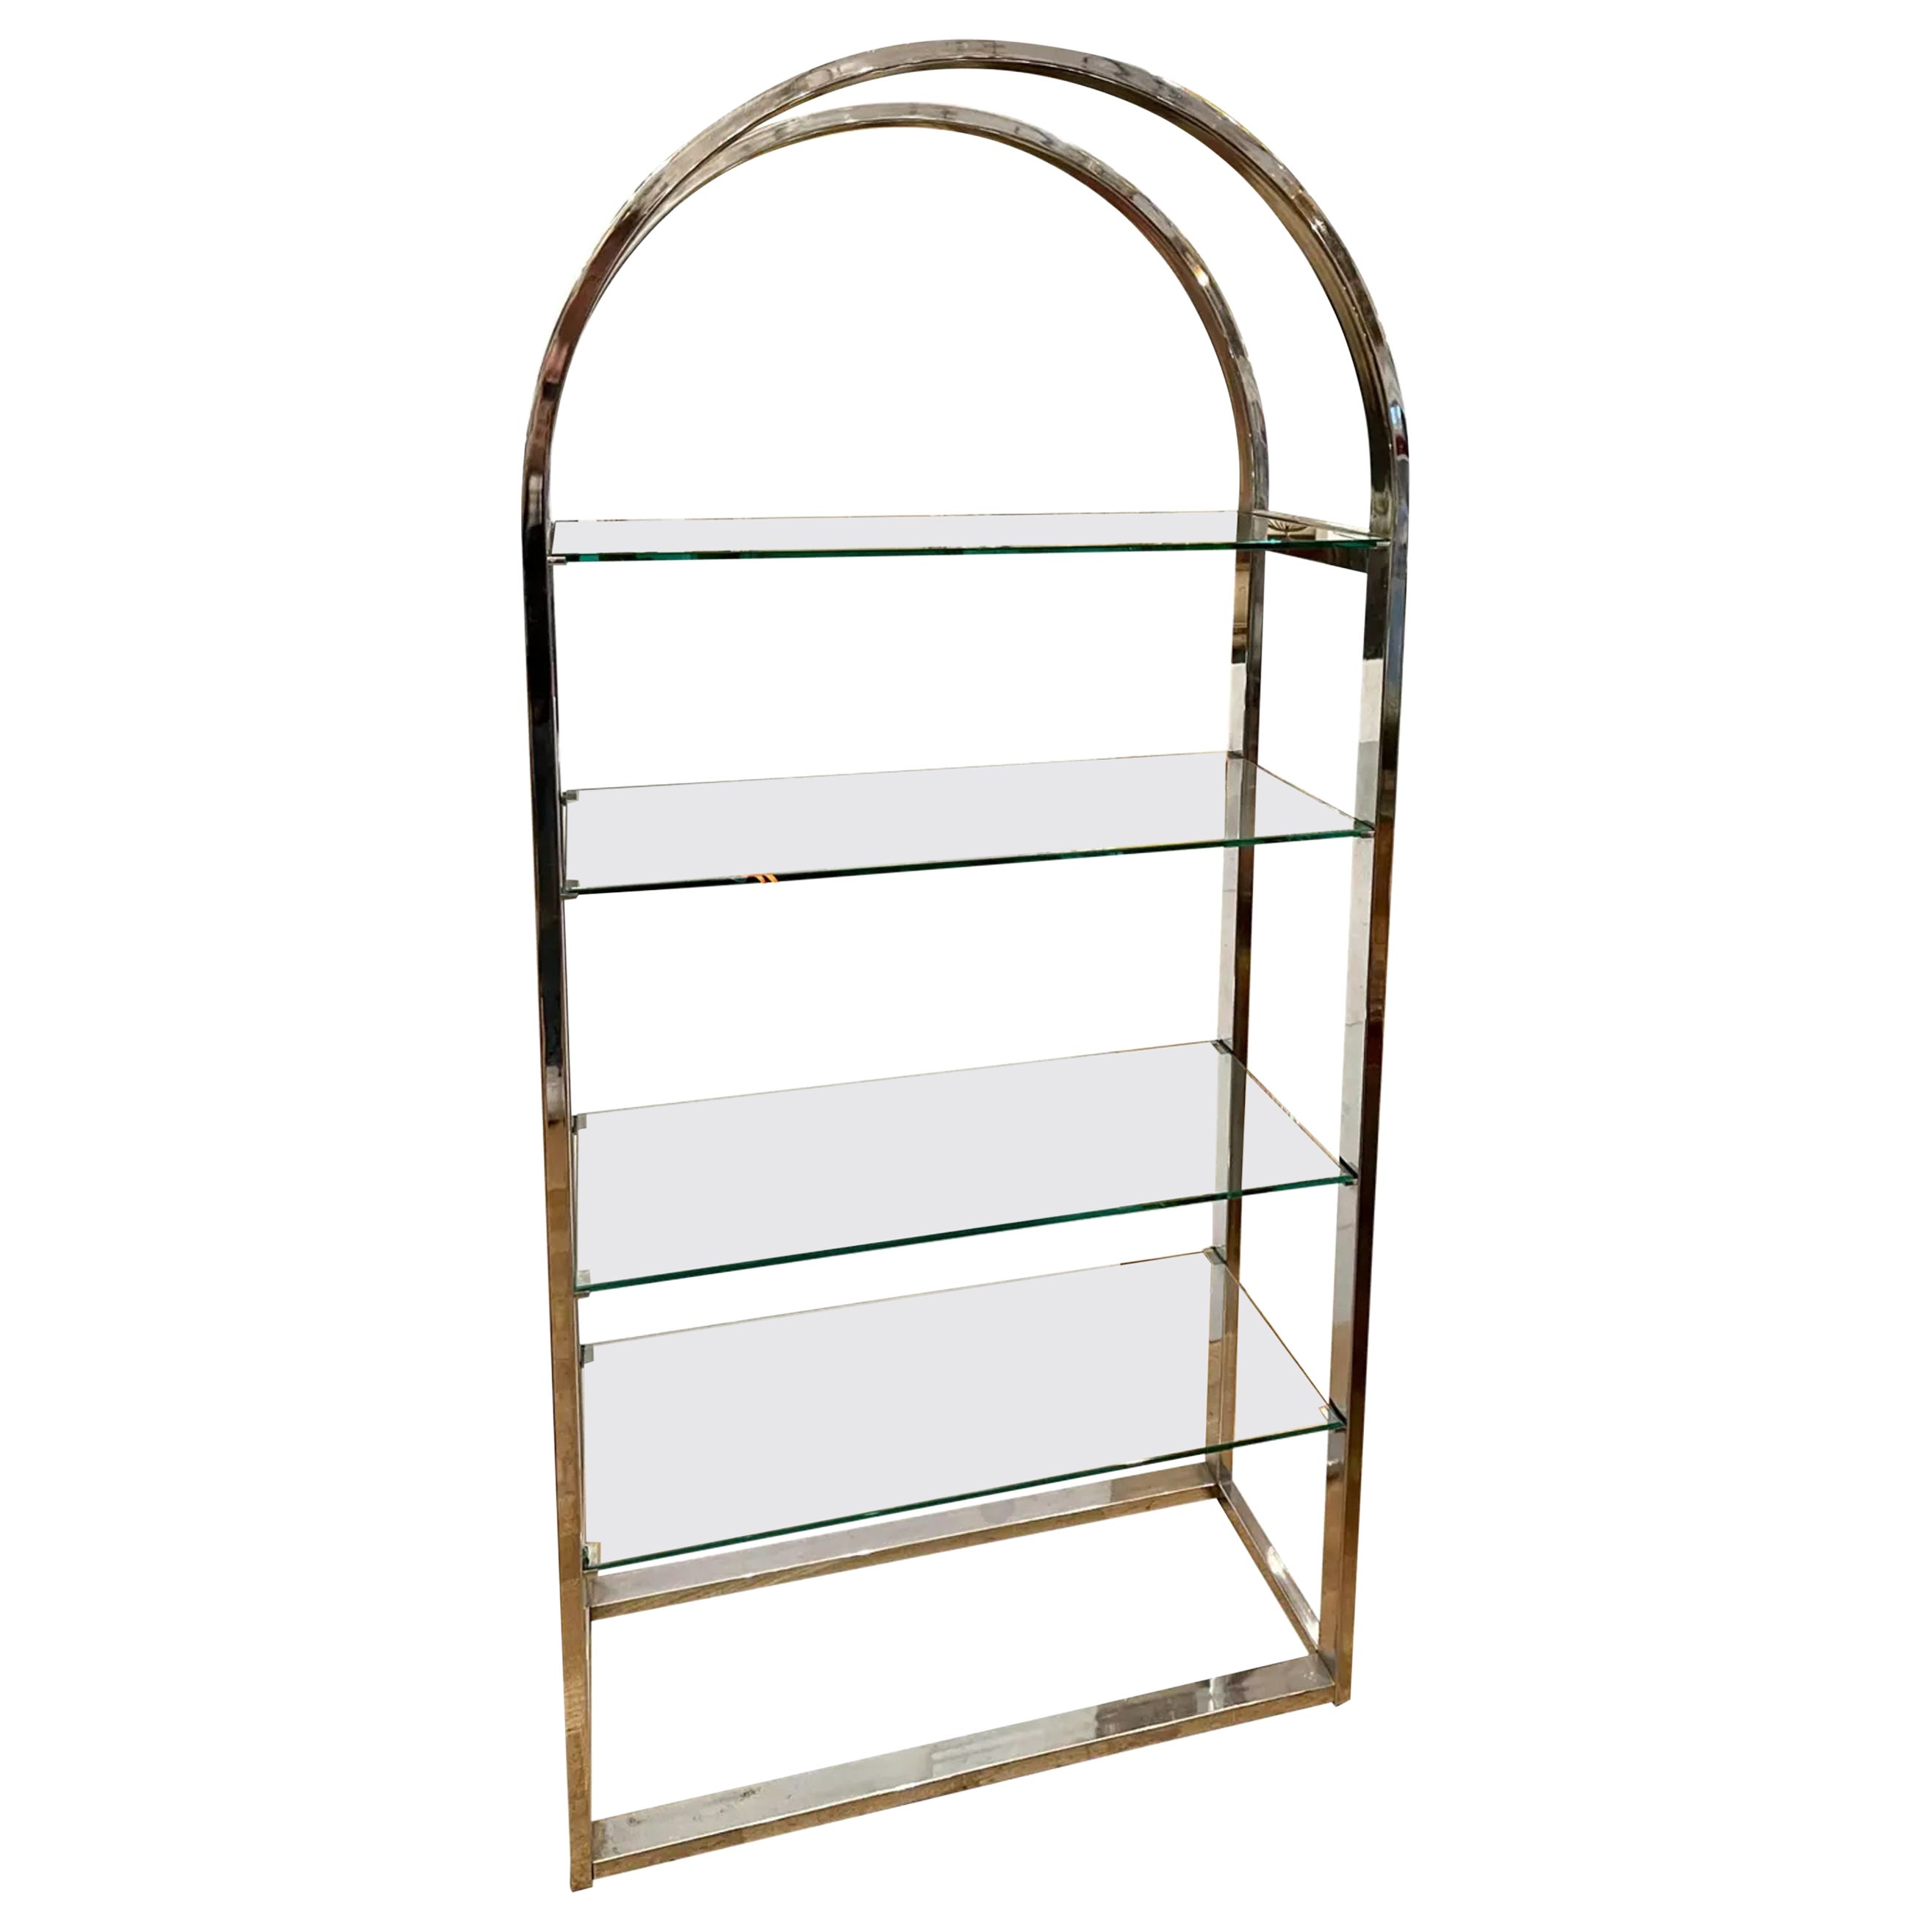 Modern Chrome & Glass Arched Etagere Display Shelving Unit, Mid-20th Century For Sale